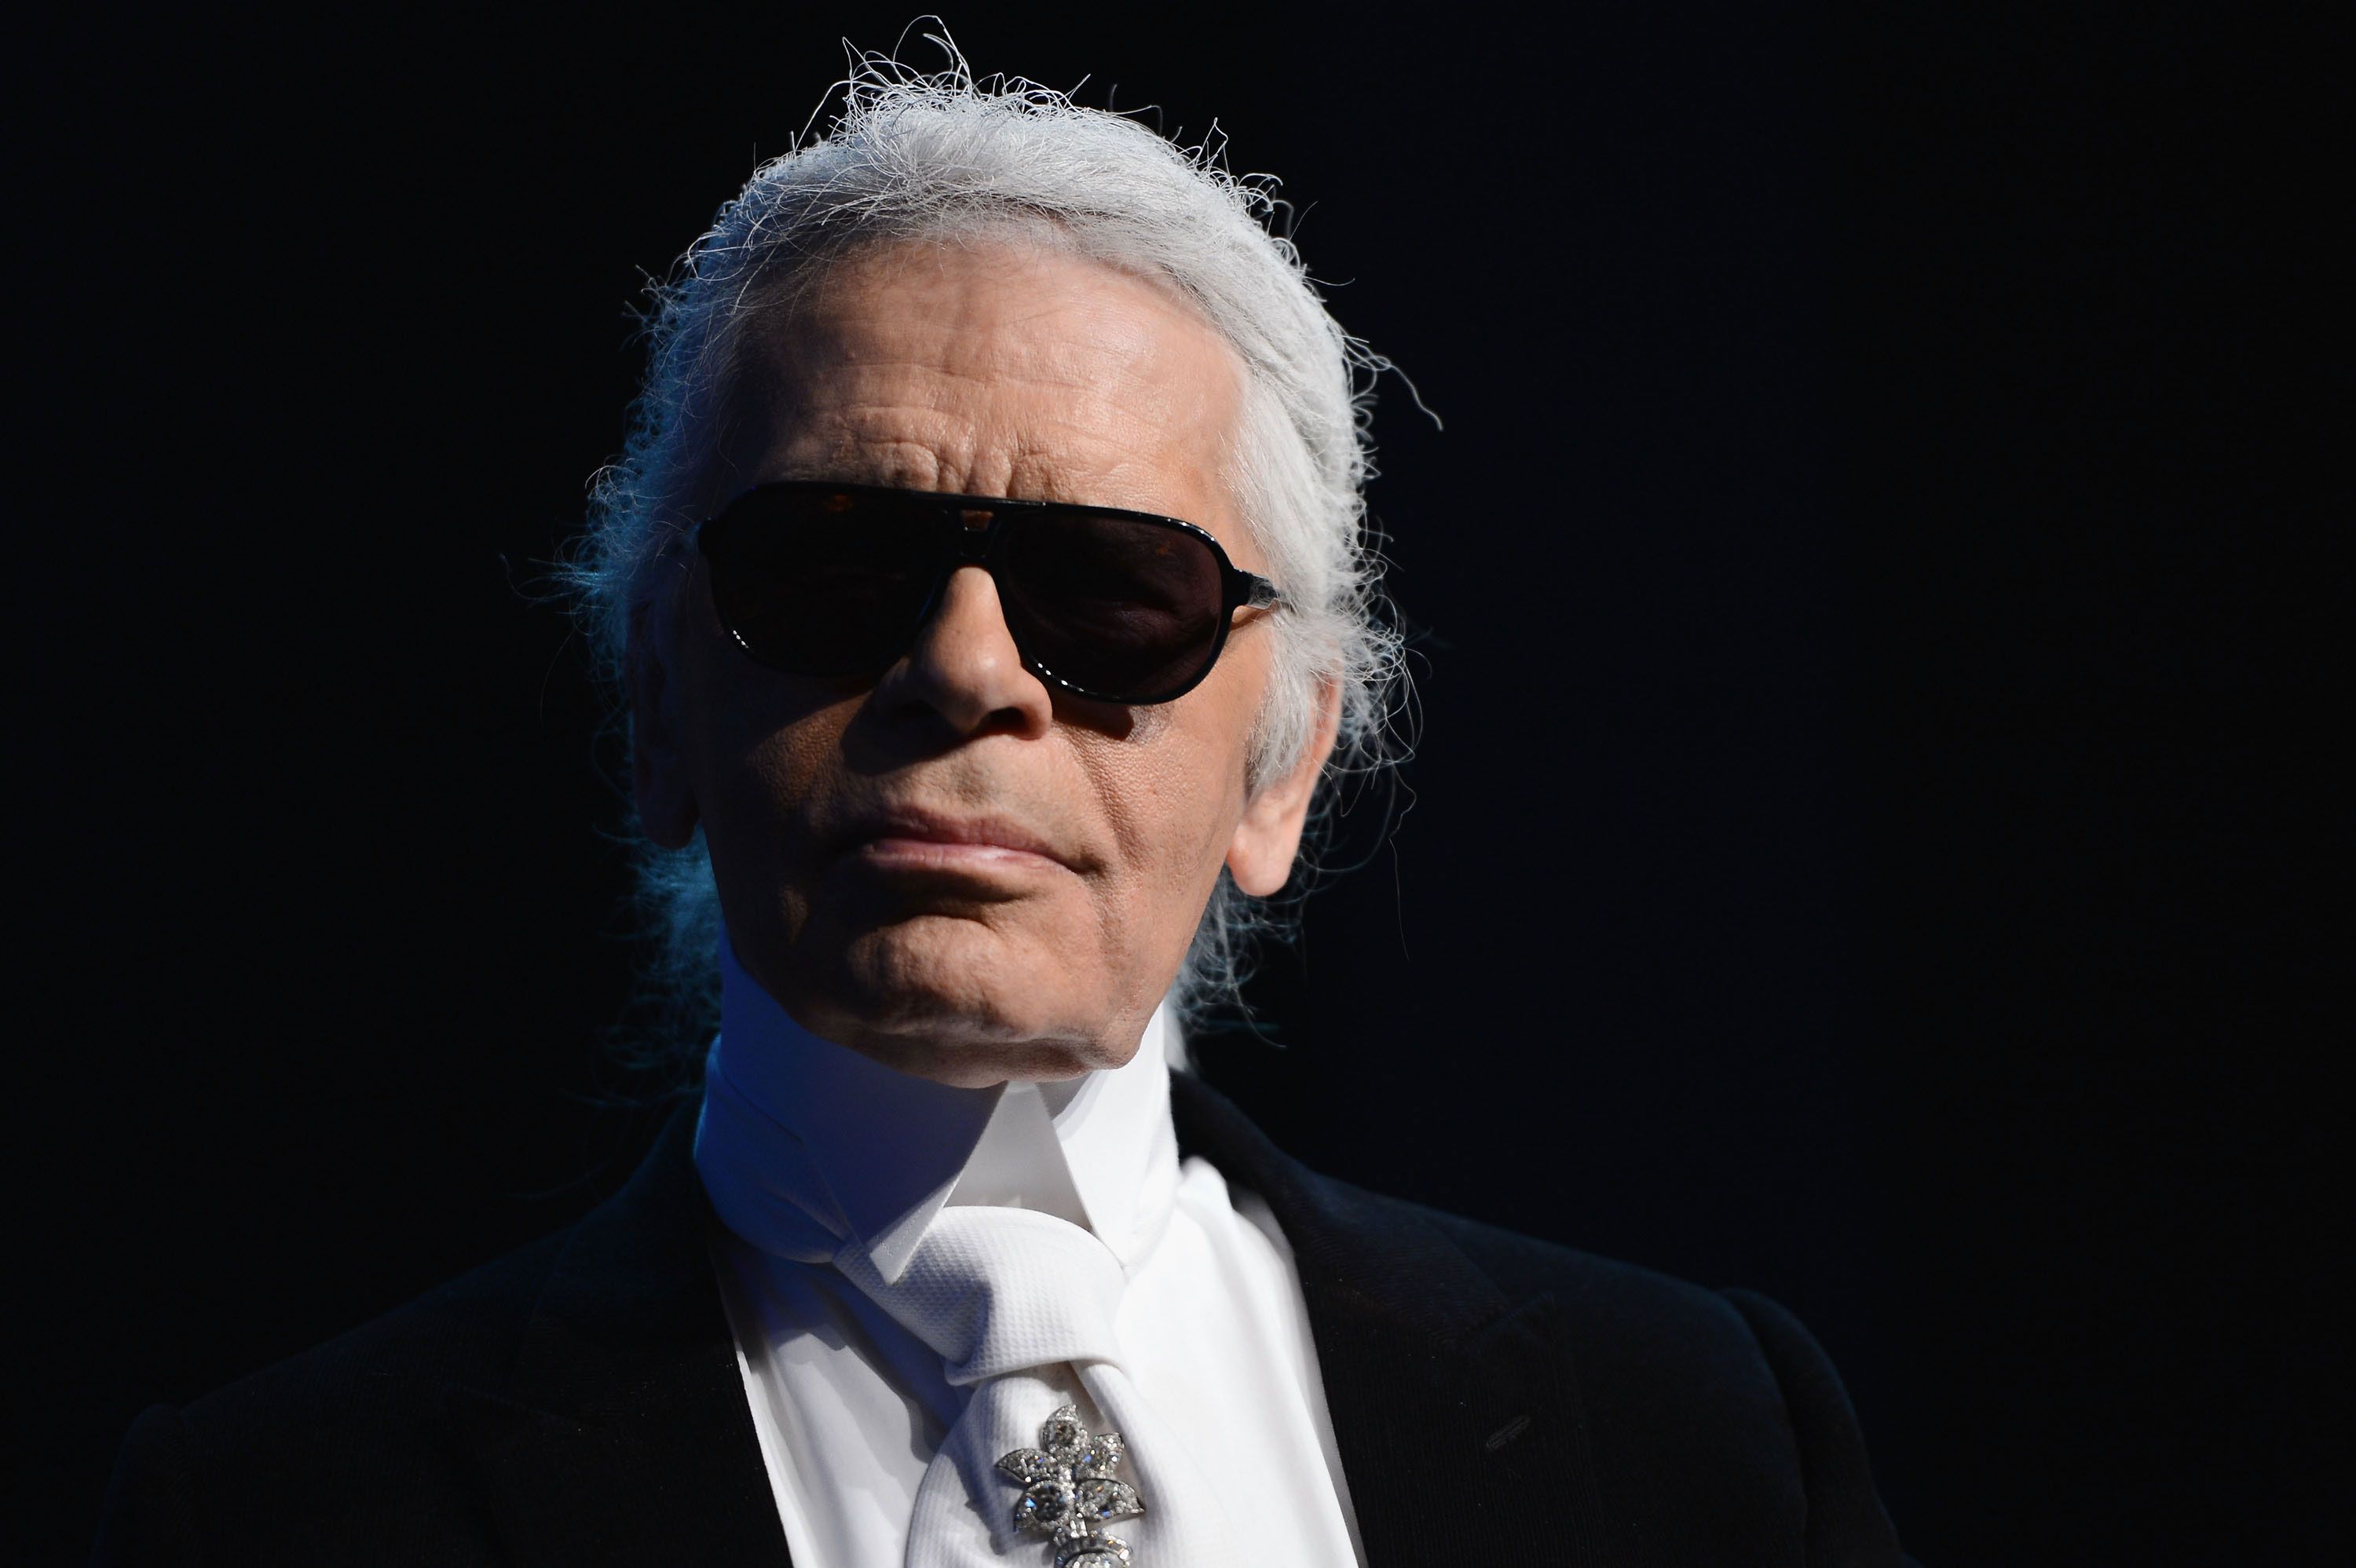 Who Is Karl Lagerfeld: Everything to Know Ahead of the Met Gala